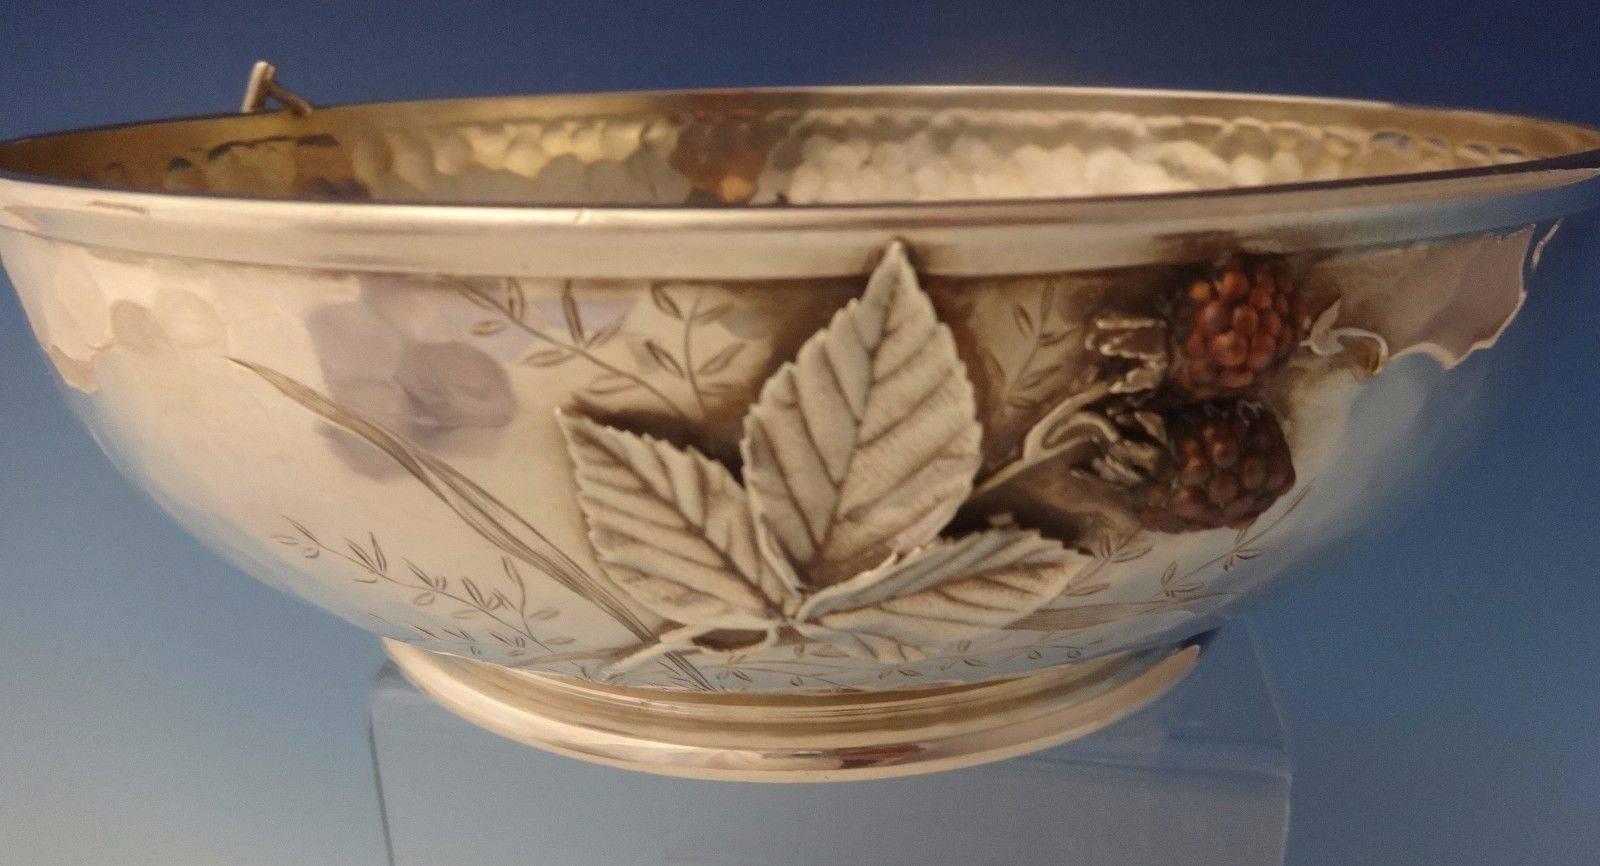 Mixed metals by Whiting.

 This amazing Whiting sterling bowl has applied mixed metal fruit. The bowl features applied sterling leaves and applied 3-D copper strawberries, cherries and raspberries. There are also bright cut leaves and grasses